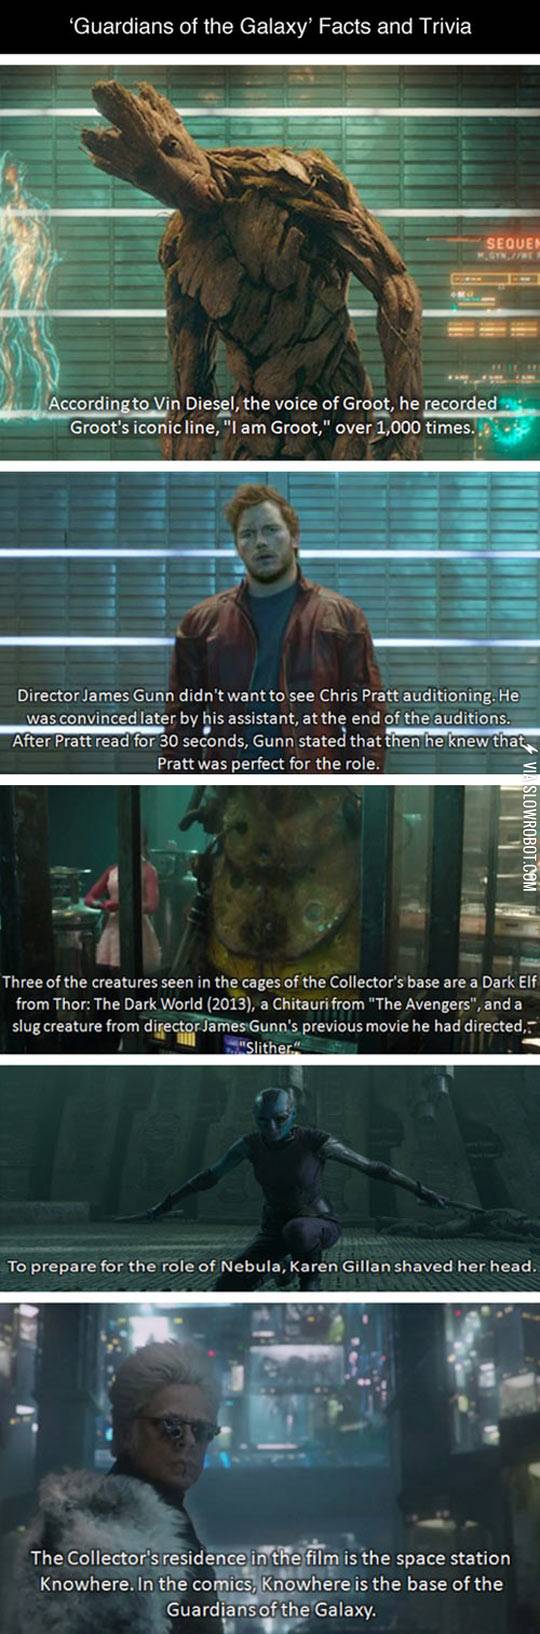 Guardians+of+the+galaxy+facts.